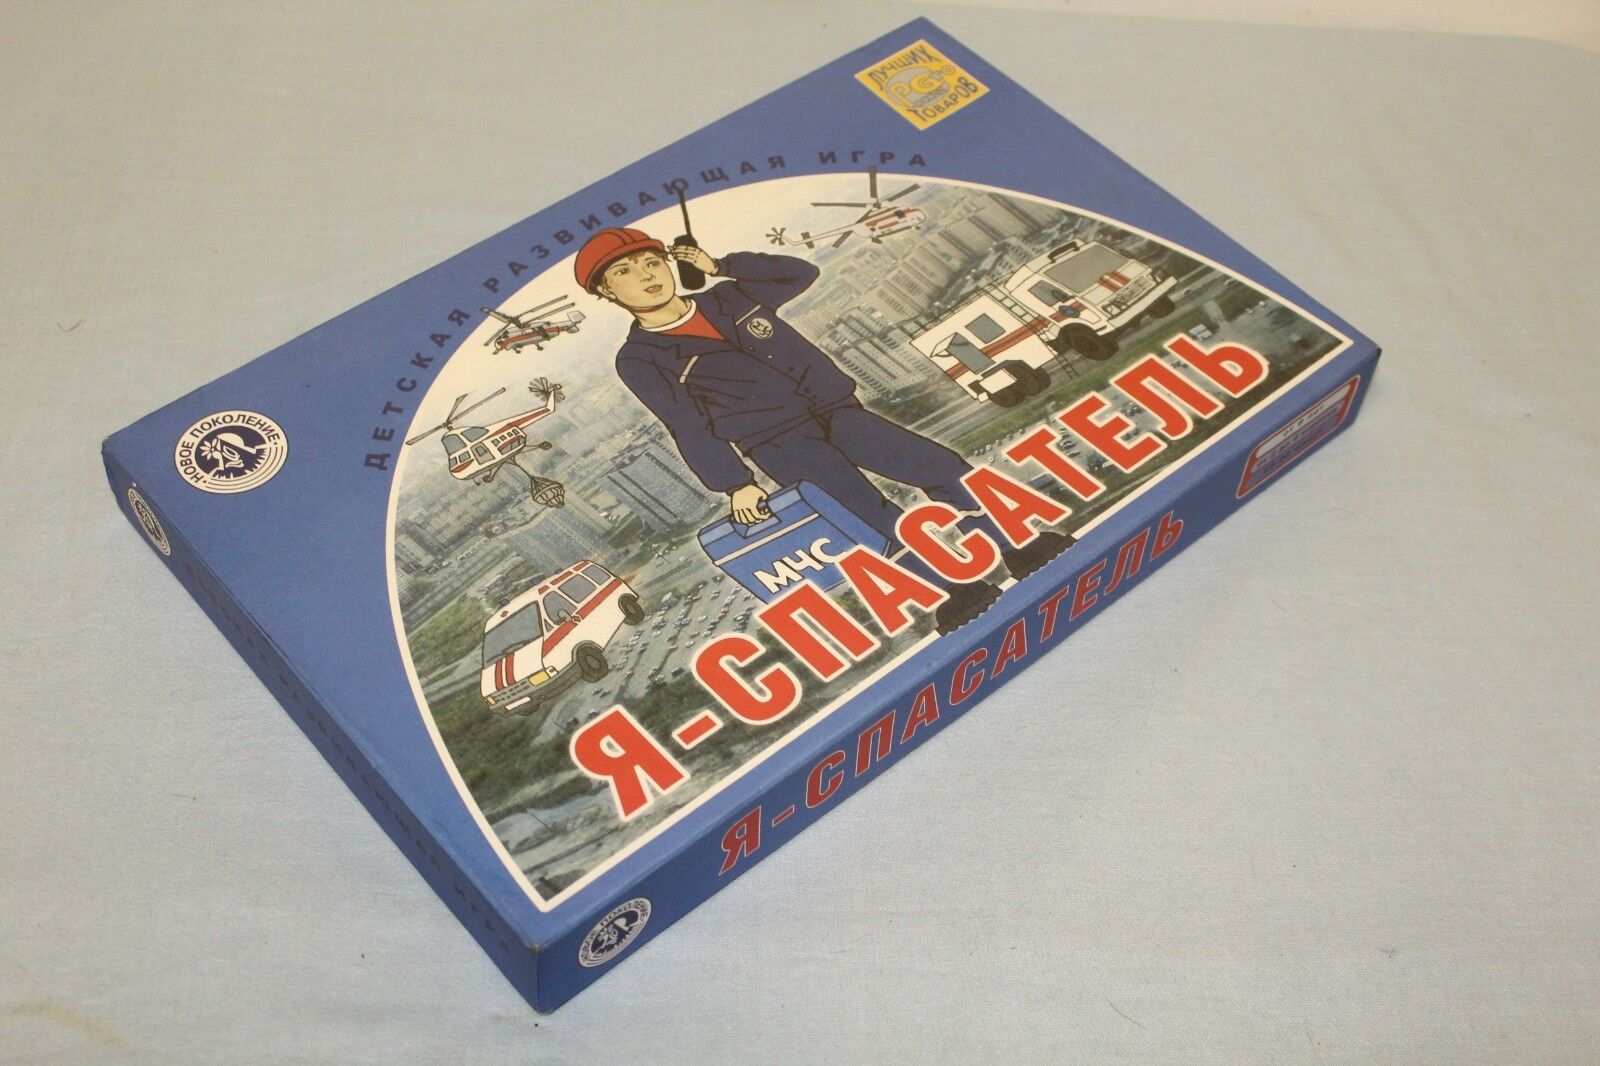 11429.Russian Board Game: I am a Rescuer. For children 9 years and older